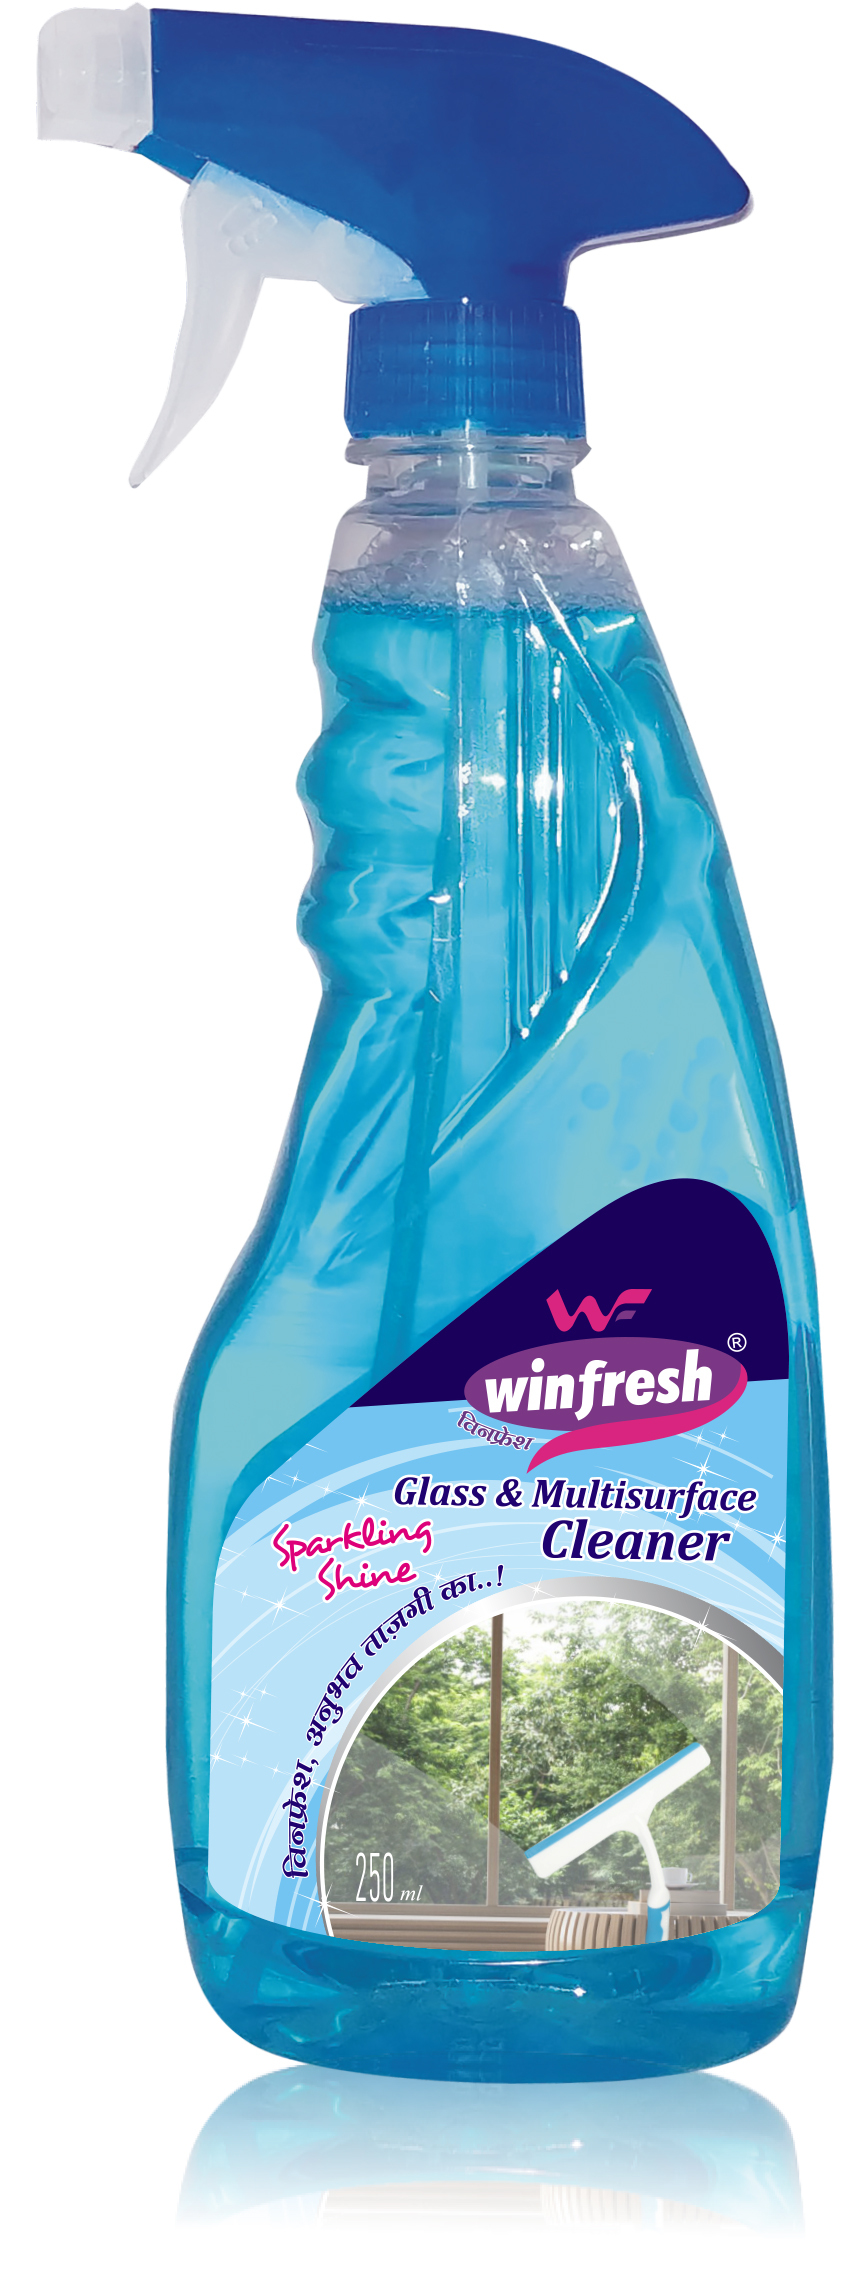 Winfresh Glass And Multisurface Cleaner